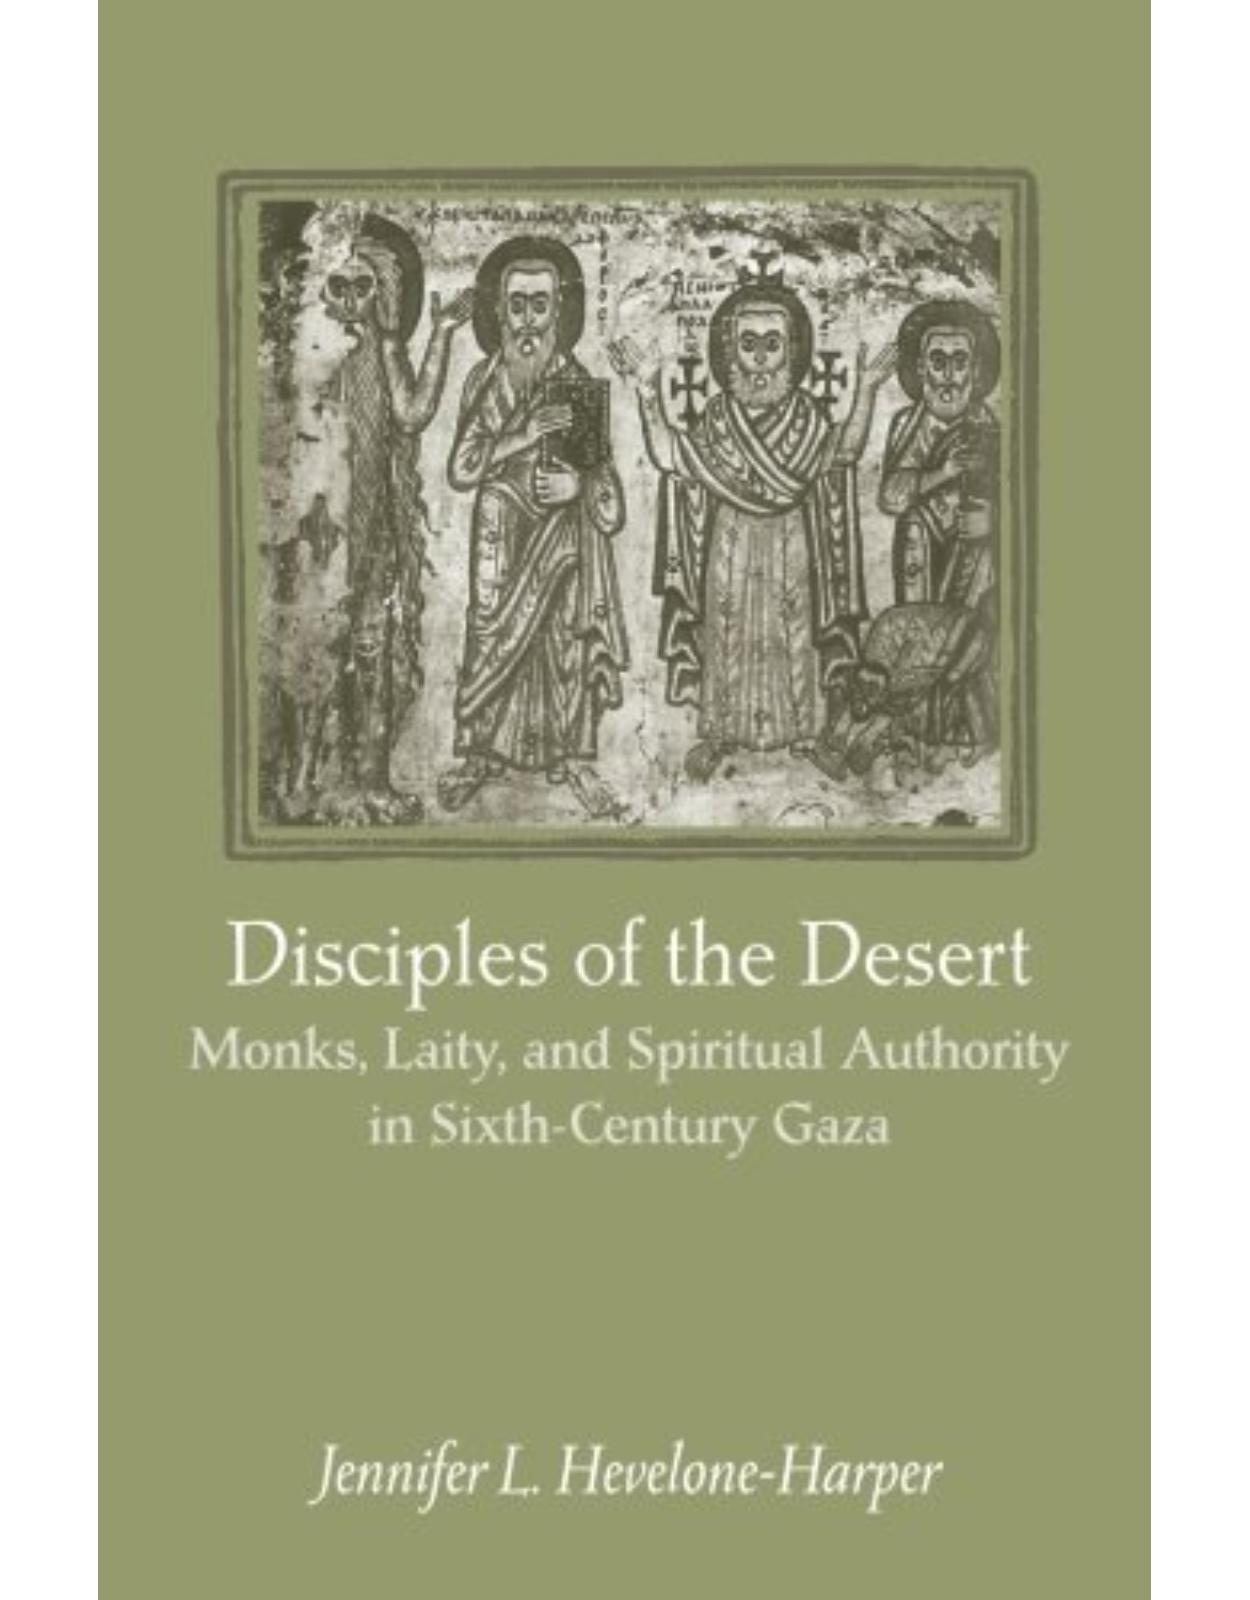 Disciples of the Desert, Monks, Laity, and Spiritual Authority in Sixth-Century Gaza